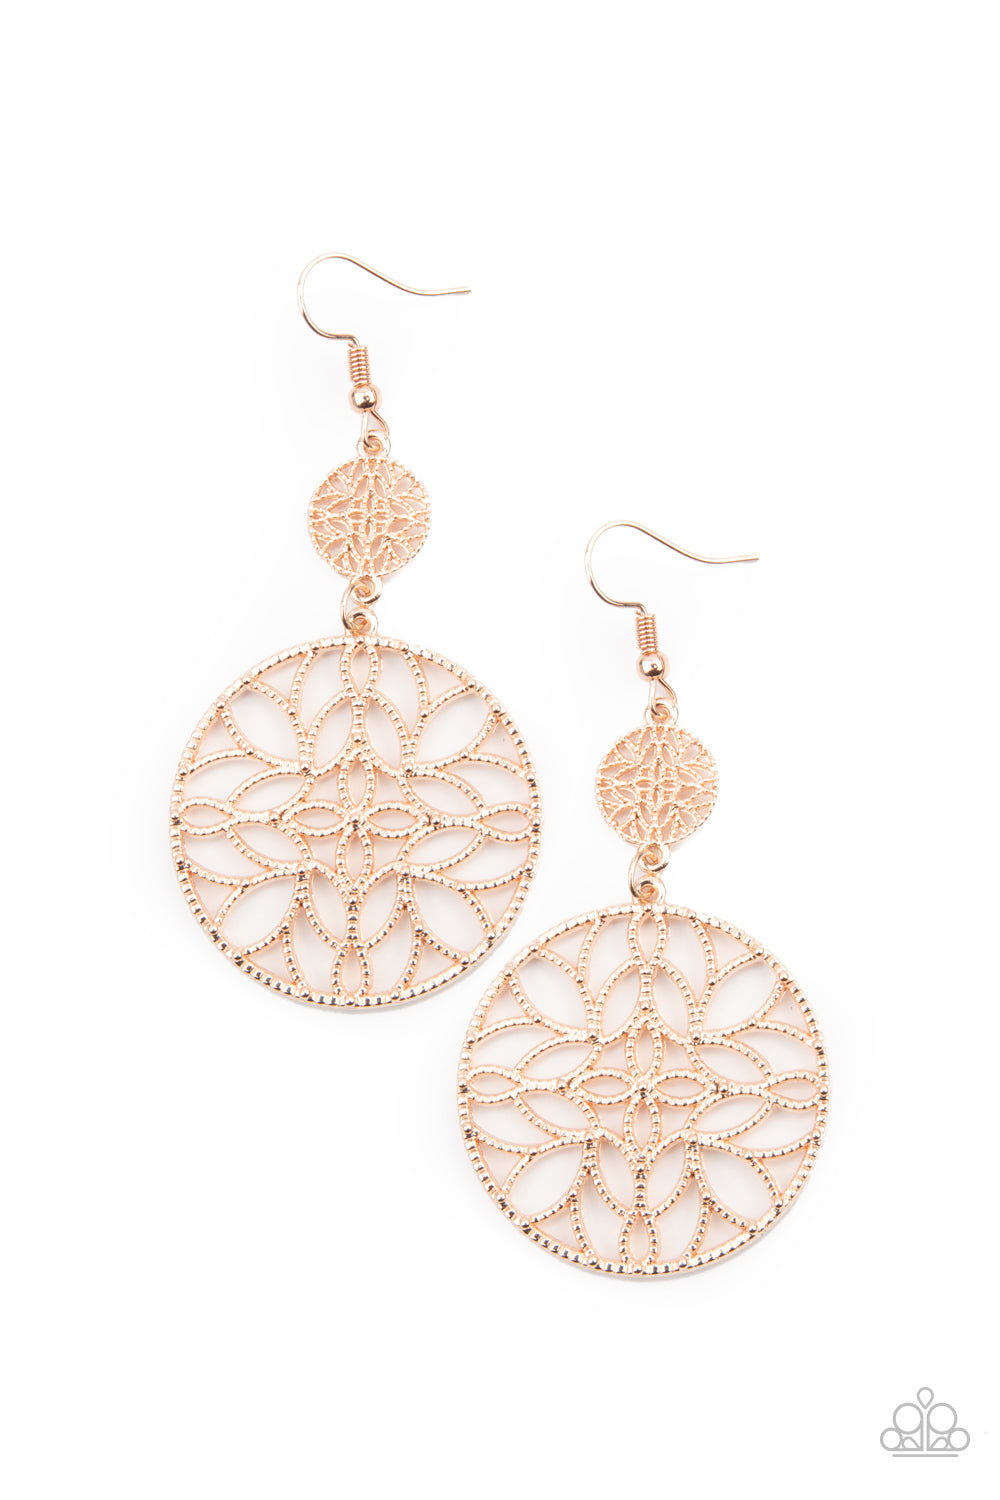 &lt;P&gt;Featuring a stenciled mandala-like pattern, a studded rose gold frame swings from a dainty matching frame, creating a whimsical lure. Earring attaches to a standard fishhook fitting. &lt;/P&gt;  

&lt;P&gt; &lt;I&gt;  Sold as one pair of earrings. &lt;/I&gt;  &lt;/P&gt;


&lt;img src=\&quot;https://d9b54x484lq62.cloudfront.net/paparazzi/shopping/images/517_tag150x115_1.png\&quot; alt=\&quot;New Kit\&quot; align=\&quot;middle\&quot; height=\&quot;50\&quot; width=\&quot;50\&quot;/&gt;